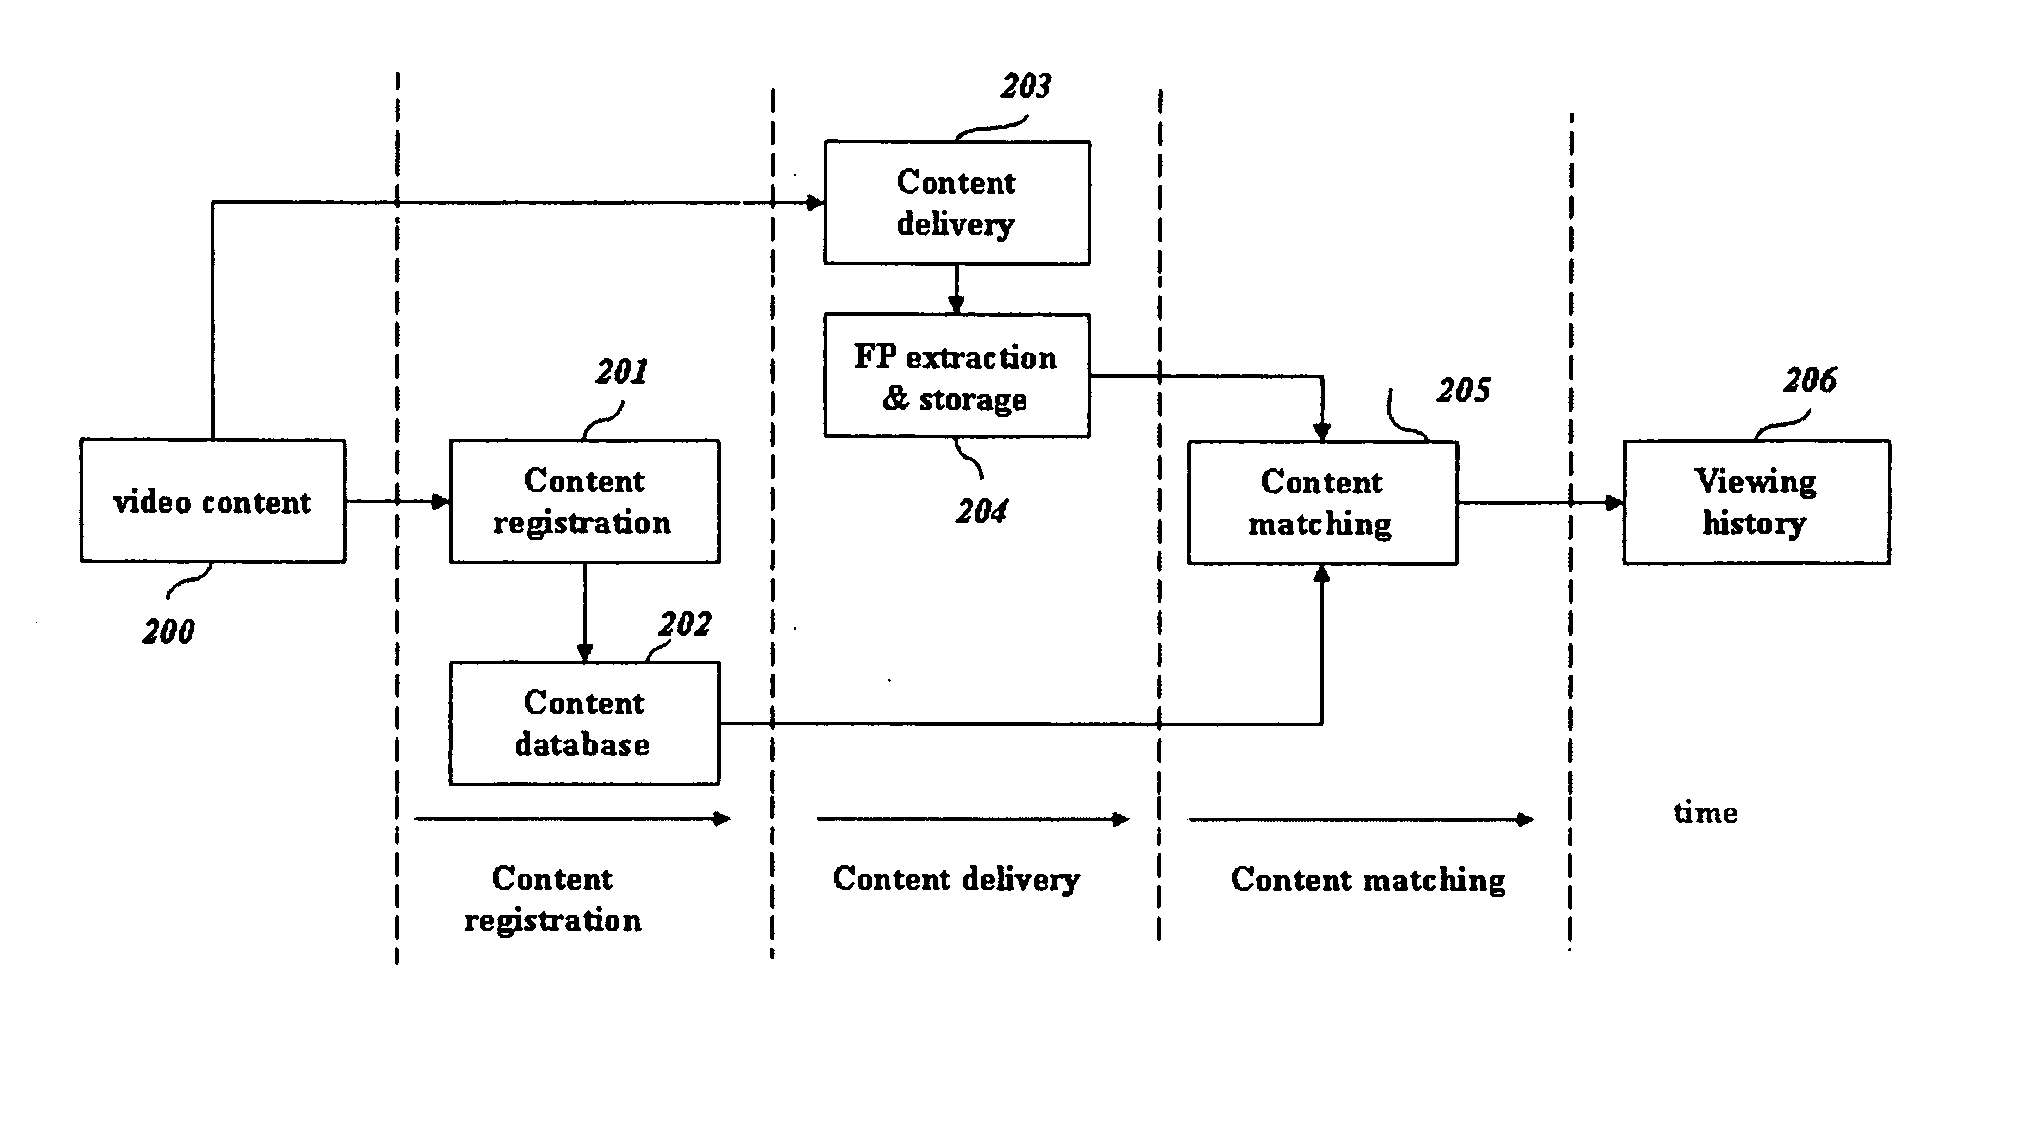 Method for Automatically Monitoring Viewing Activities of Television Signals